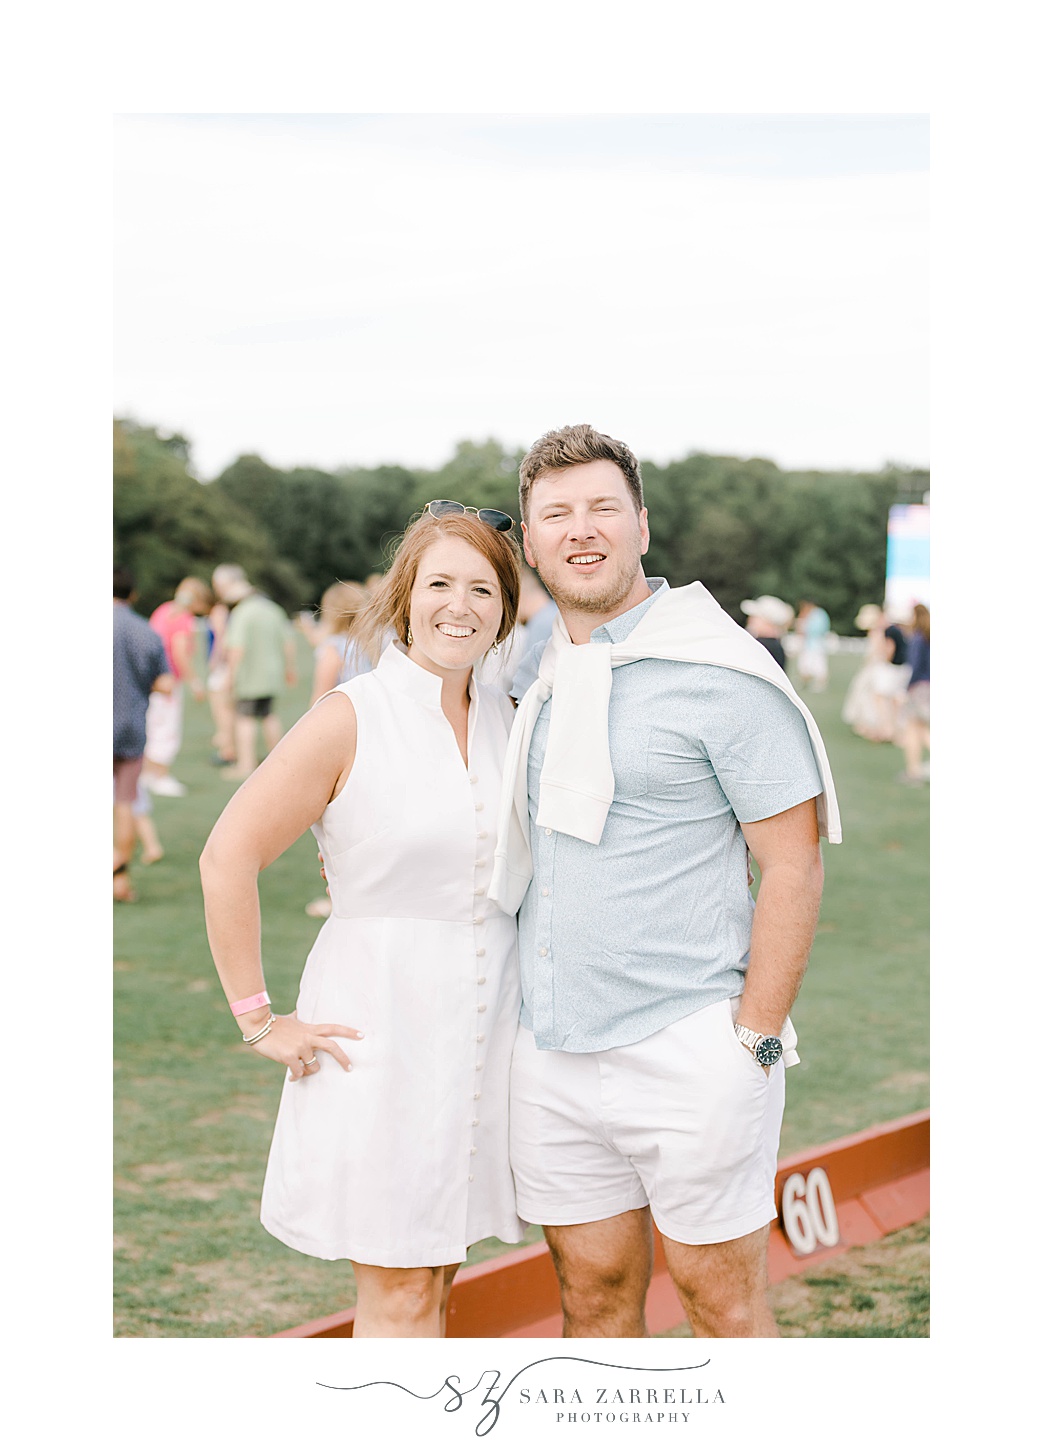 engaged couple poses at Newport Polo match